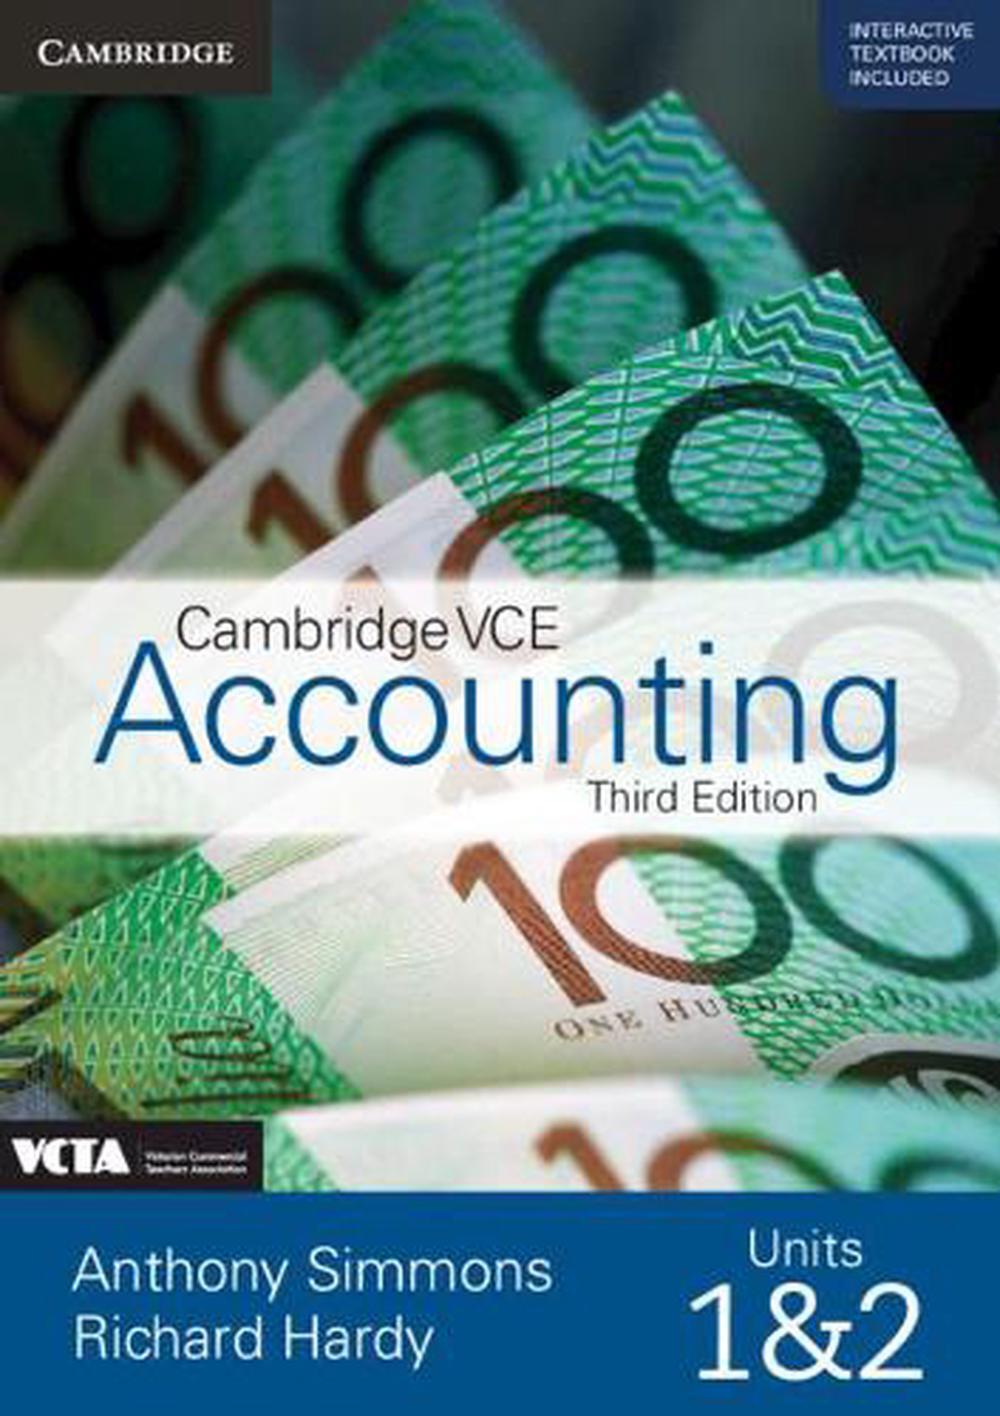 cambridge vce accounting units 1 and 2 3rd edition richard hardy, anthony simmons 110846985x, 9781108469852